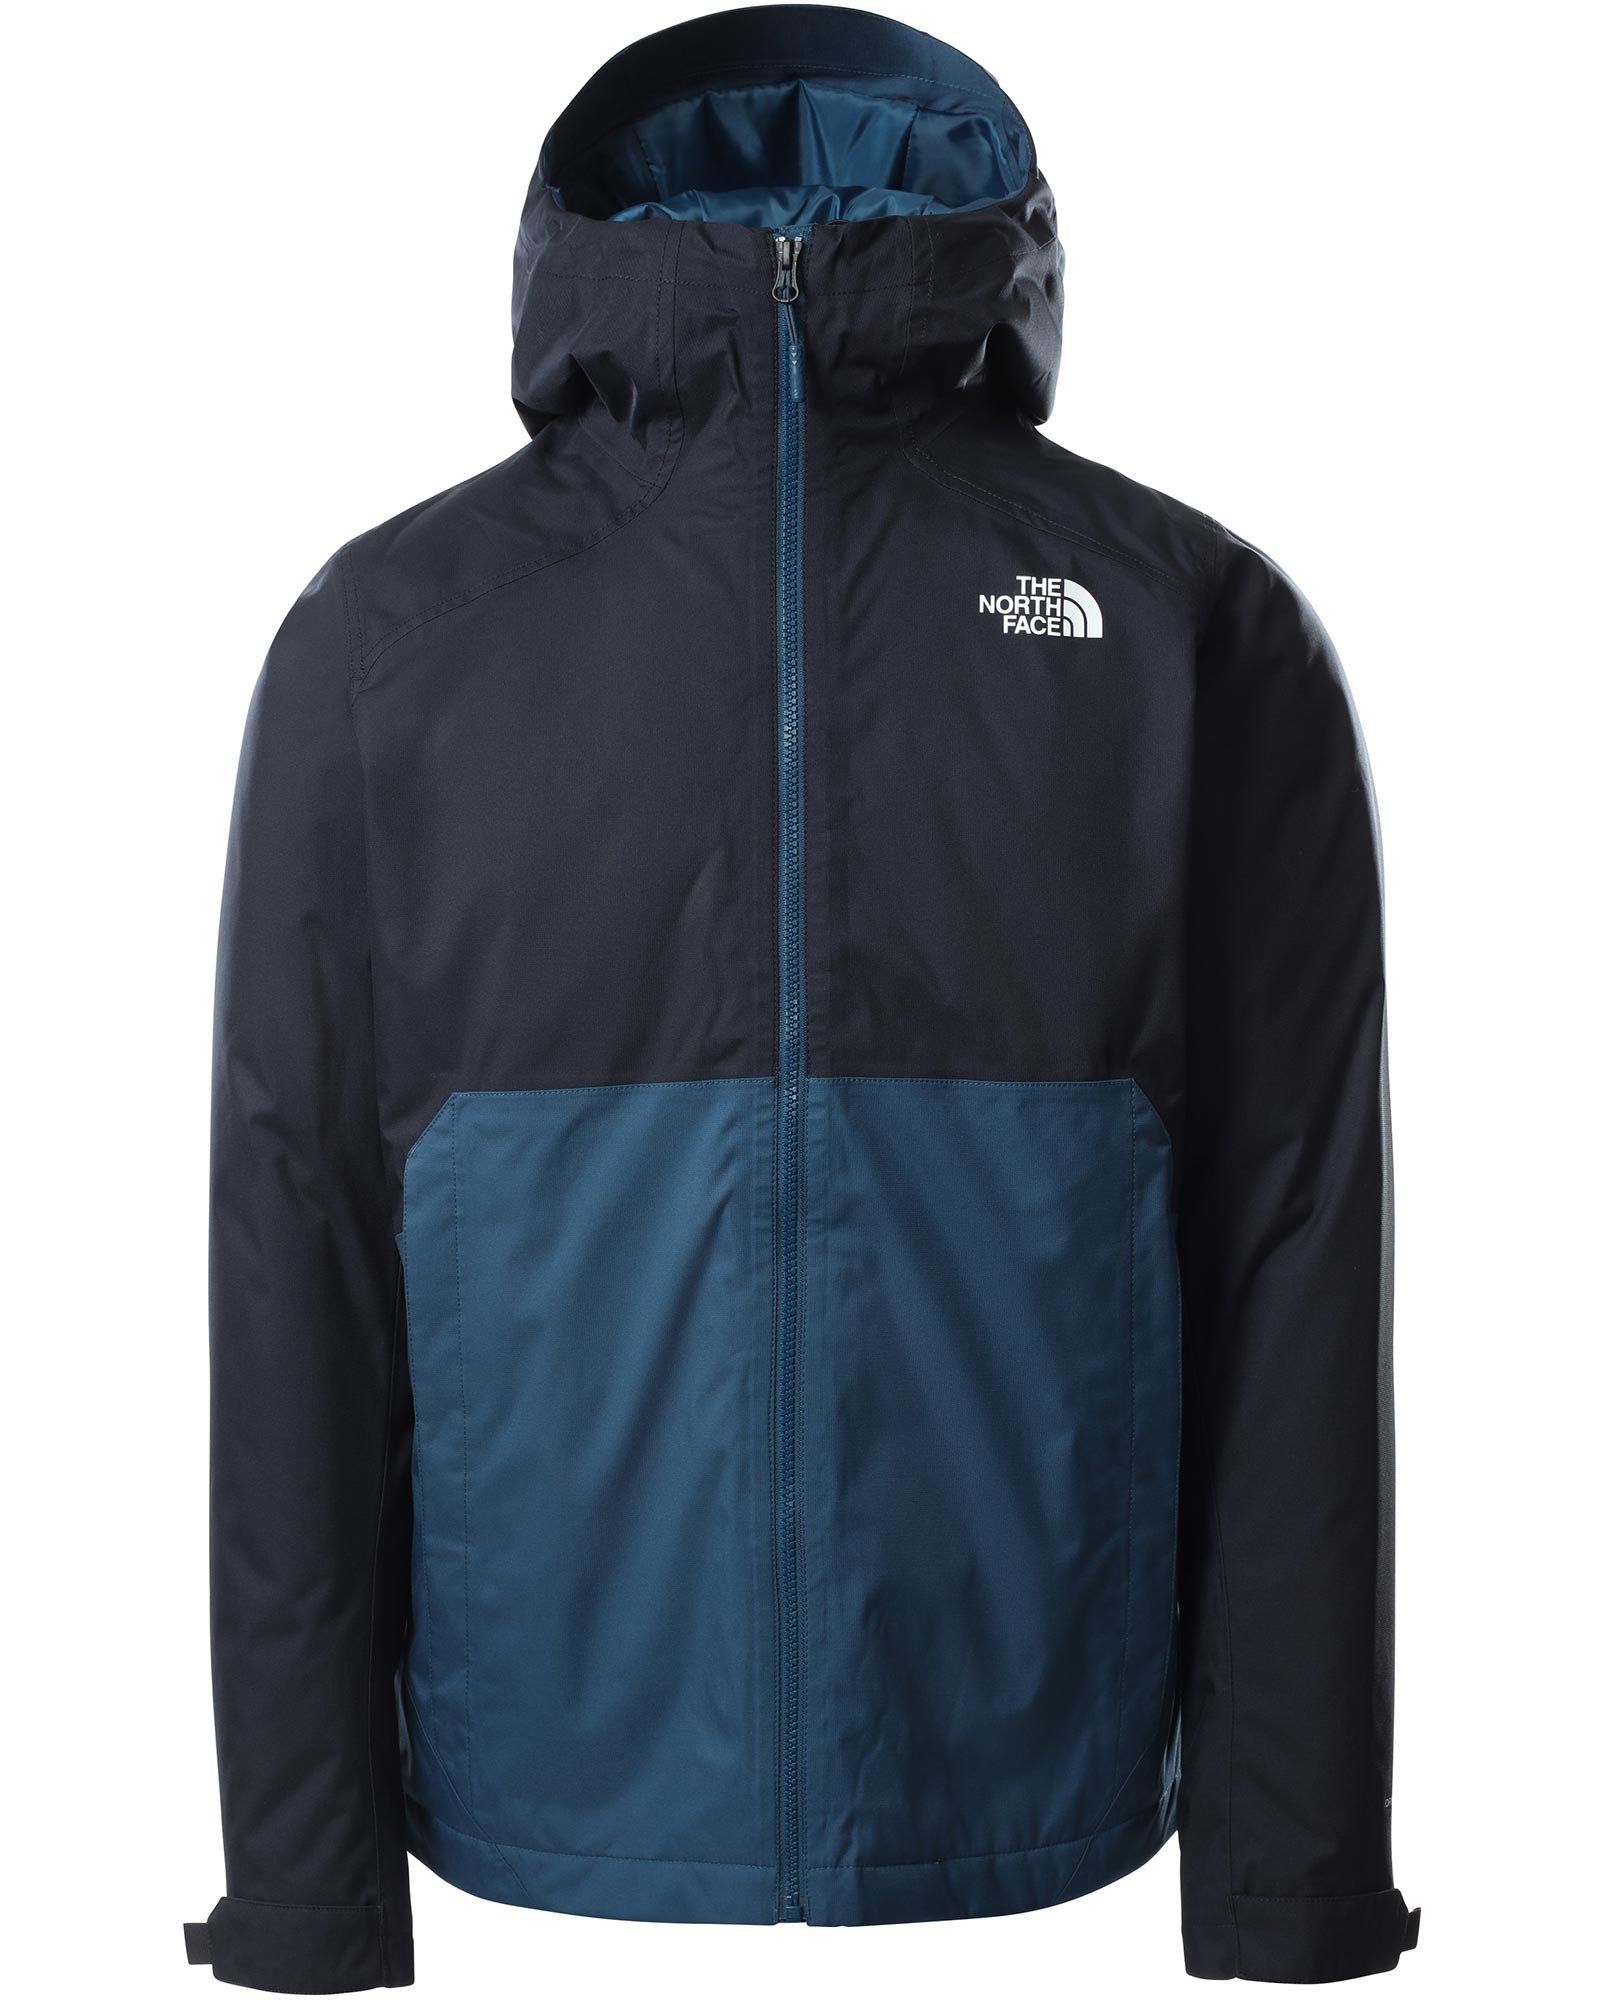 The North Face Millerton DryVent Men’s Insulated Jacket - Monterey Blue/TNF Black S